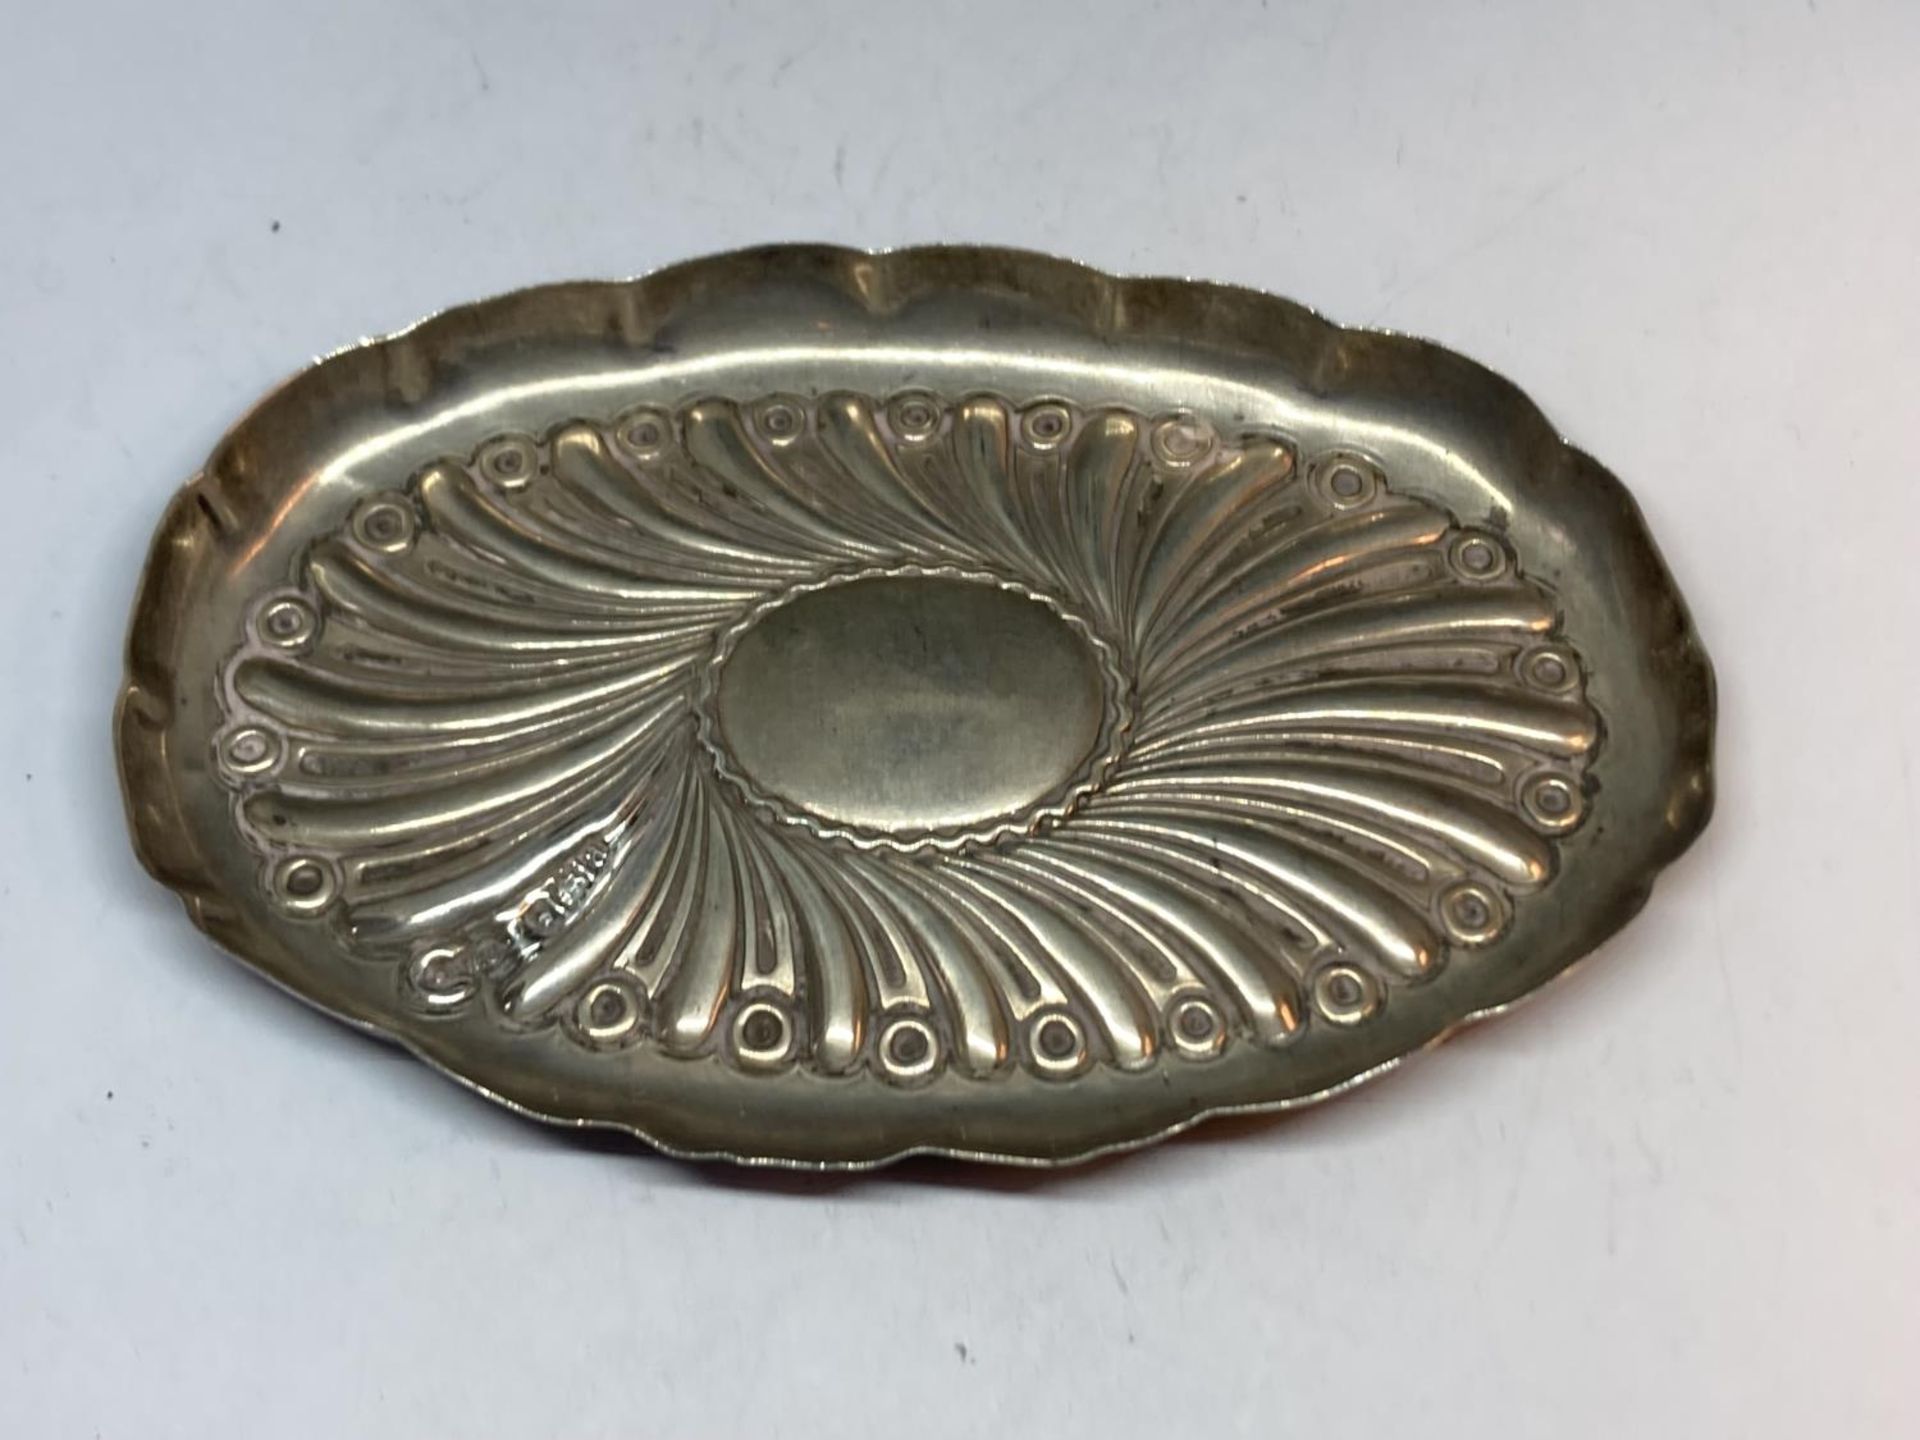 A HALLMARKED BIRMINGHAM SILVER OVAL DISH GROSS WEIGHT 38.6 GRAMS - Image 2 of 4